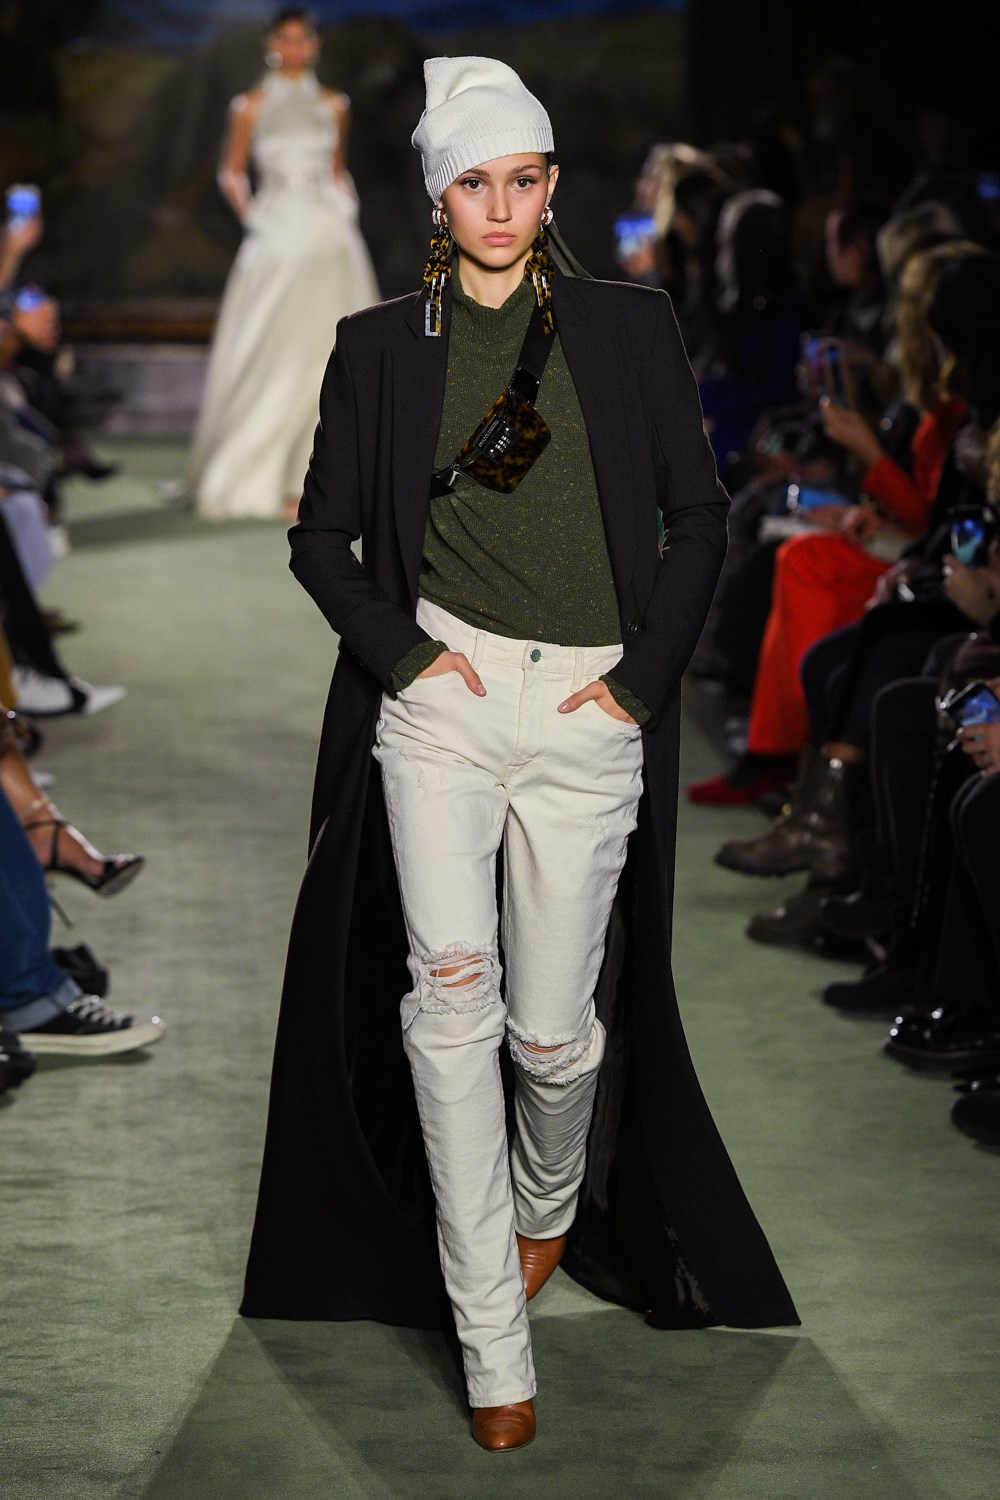 Loden Green Fall 2020 Fashion Trend | The Impression